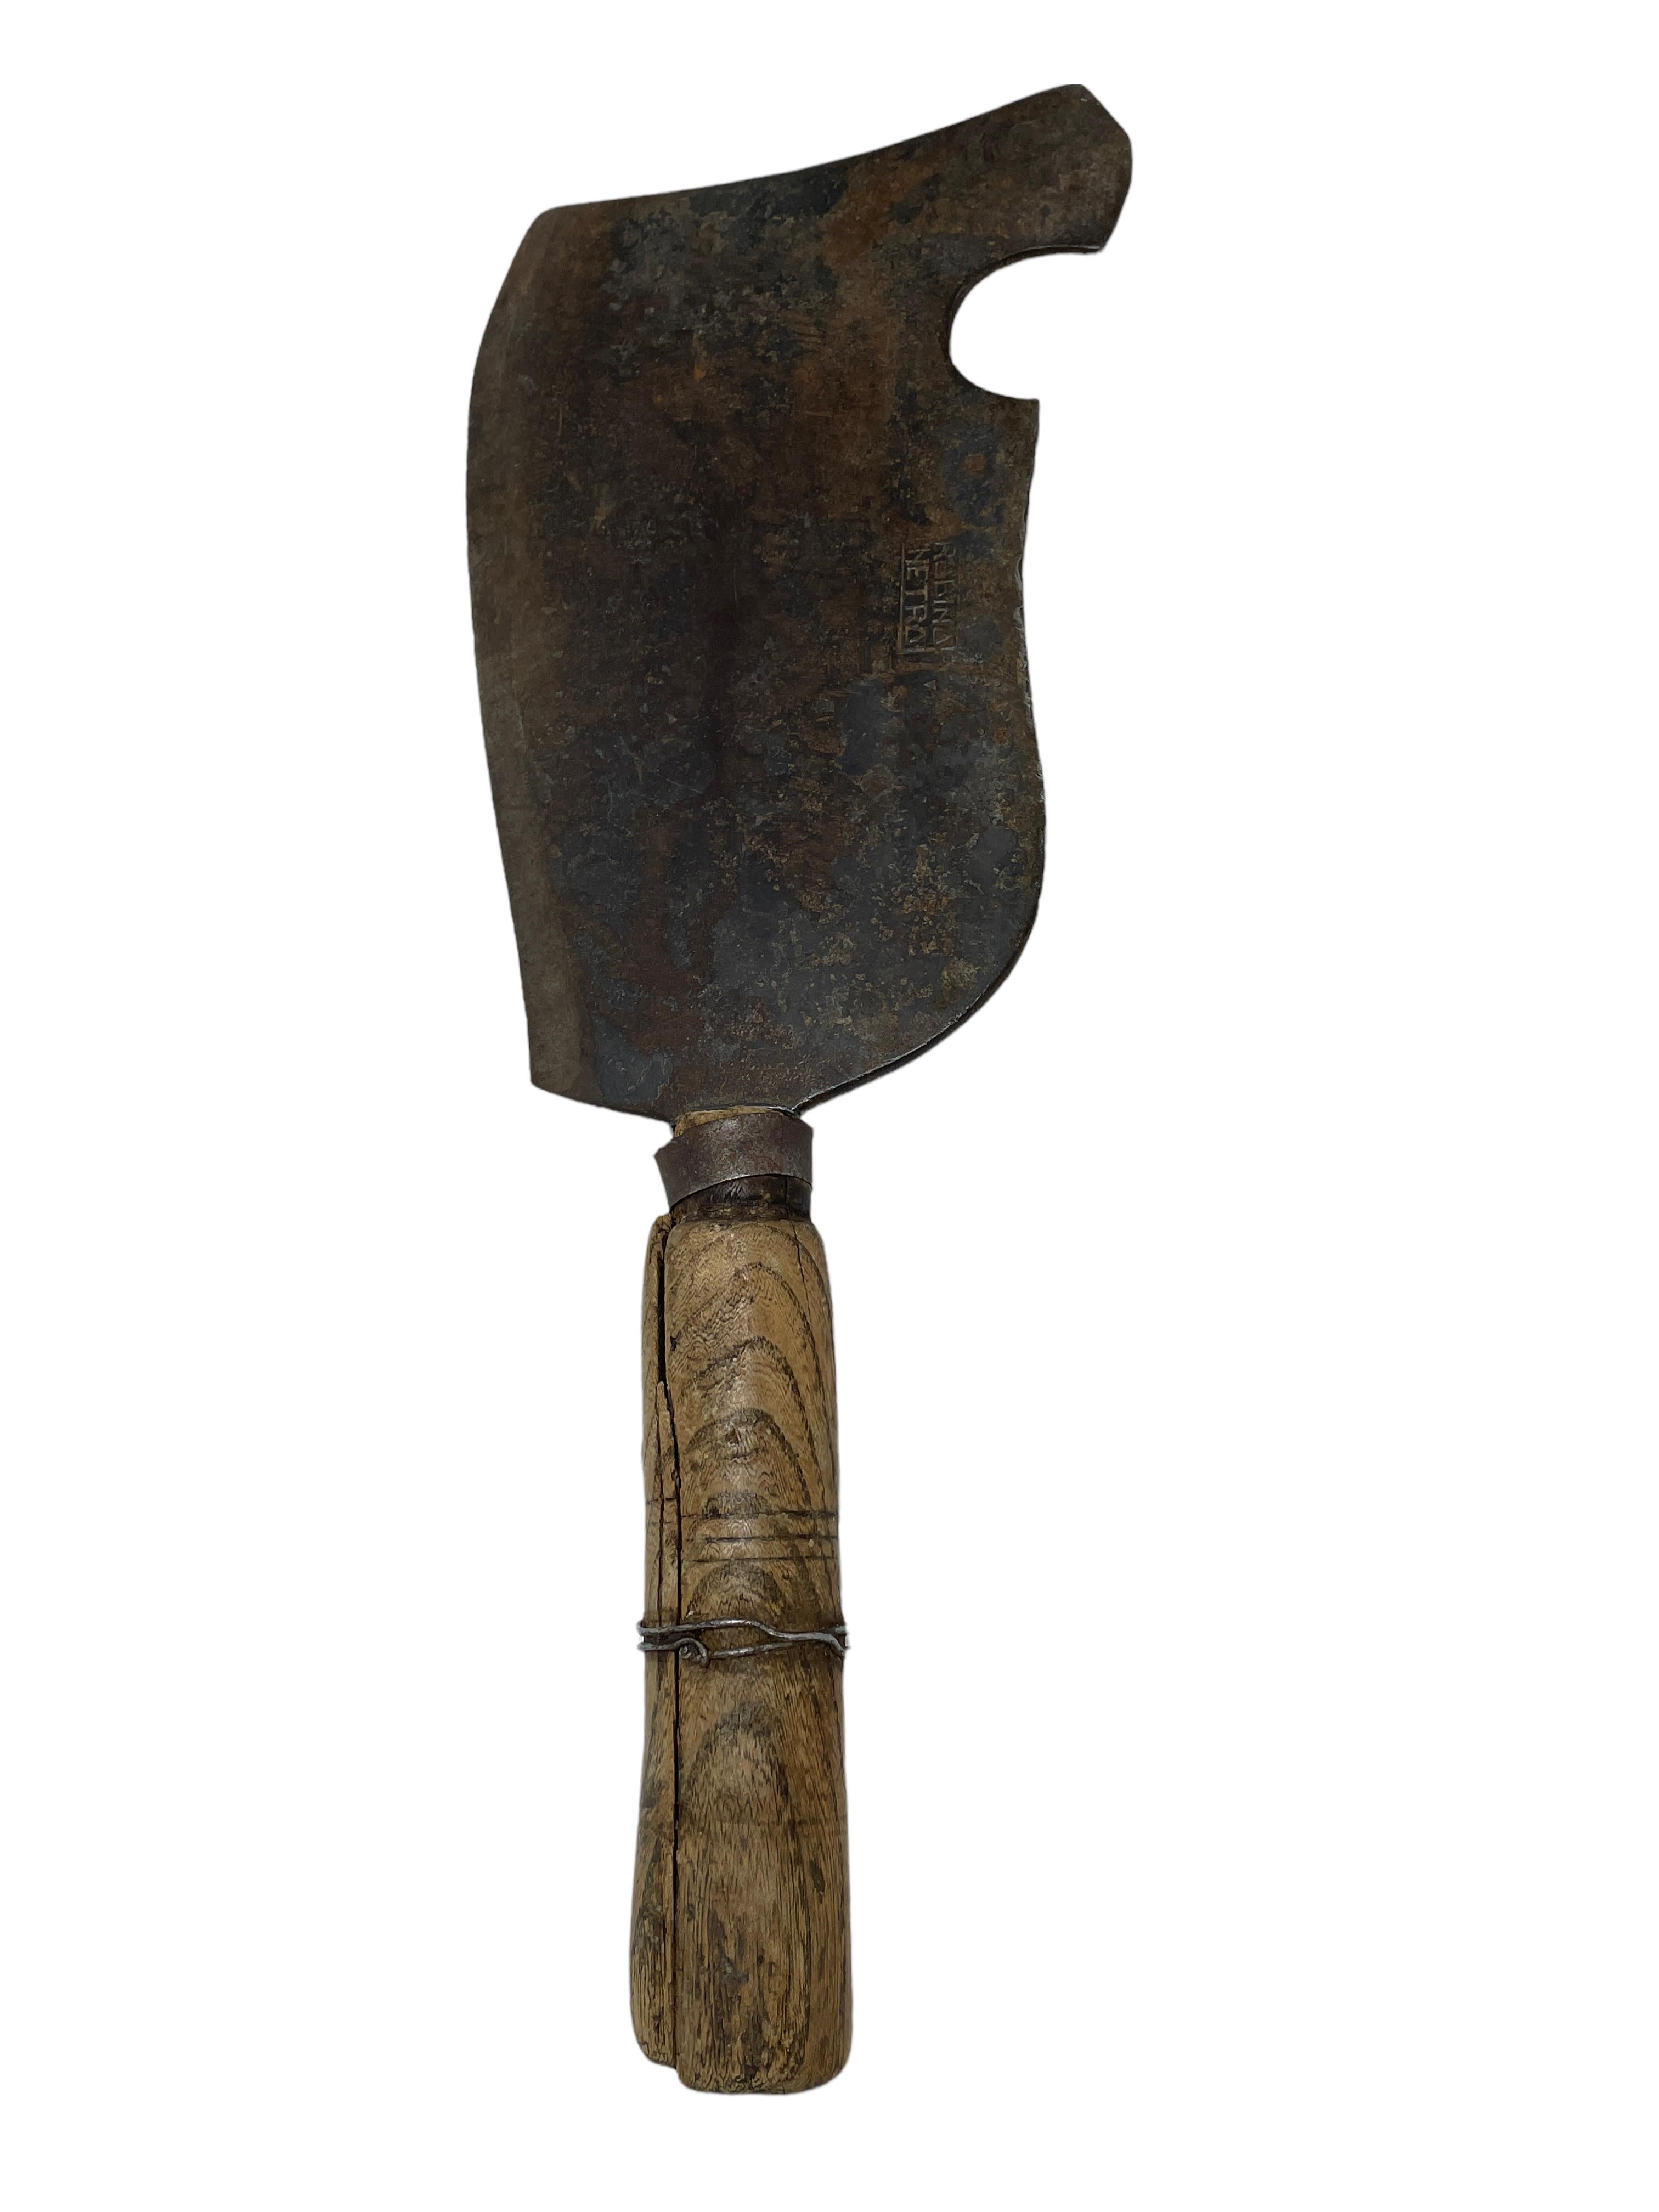 Hand-Crafted Highly Decorative 19th Century European Italian Cleaver, Kitchen Utensil For Sale